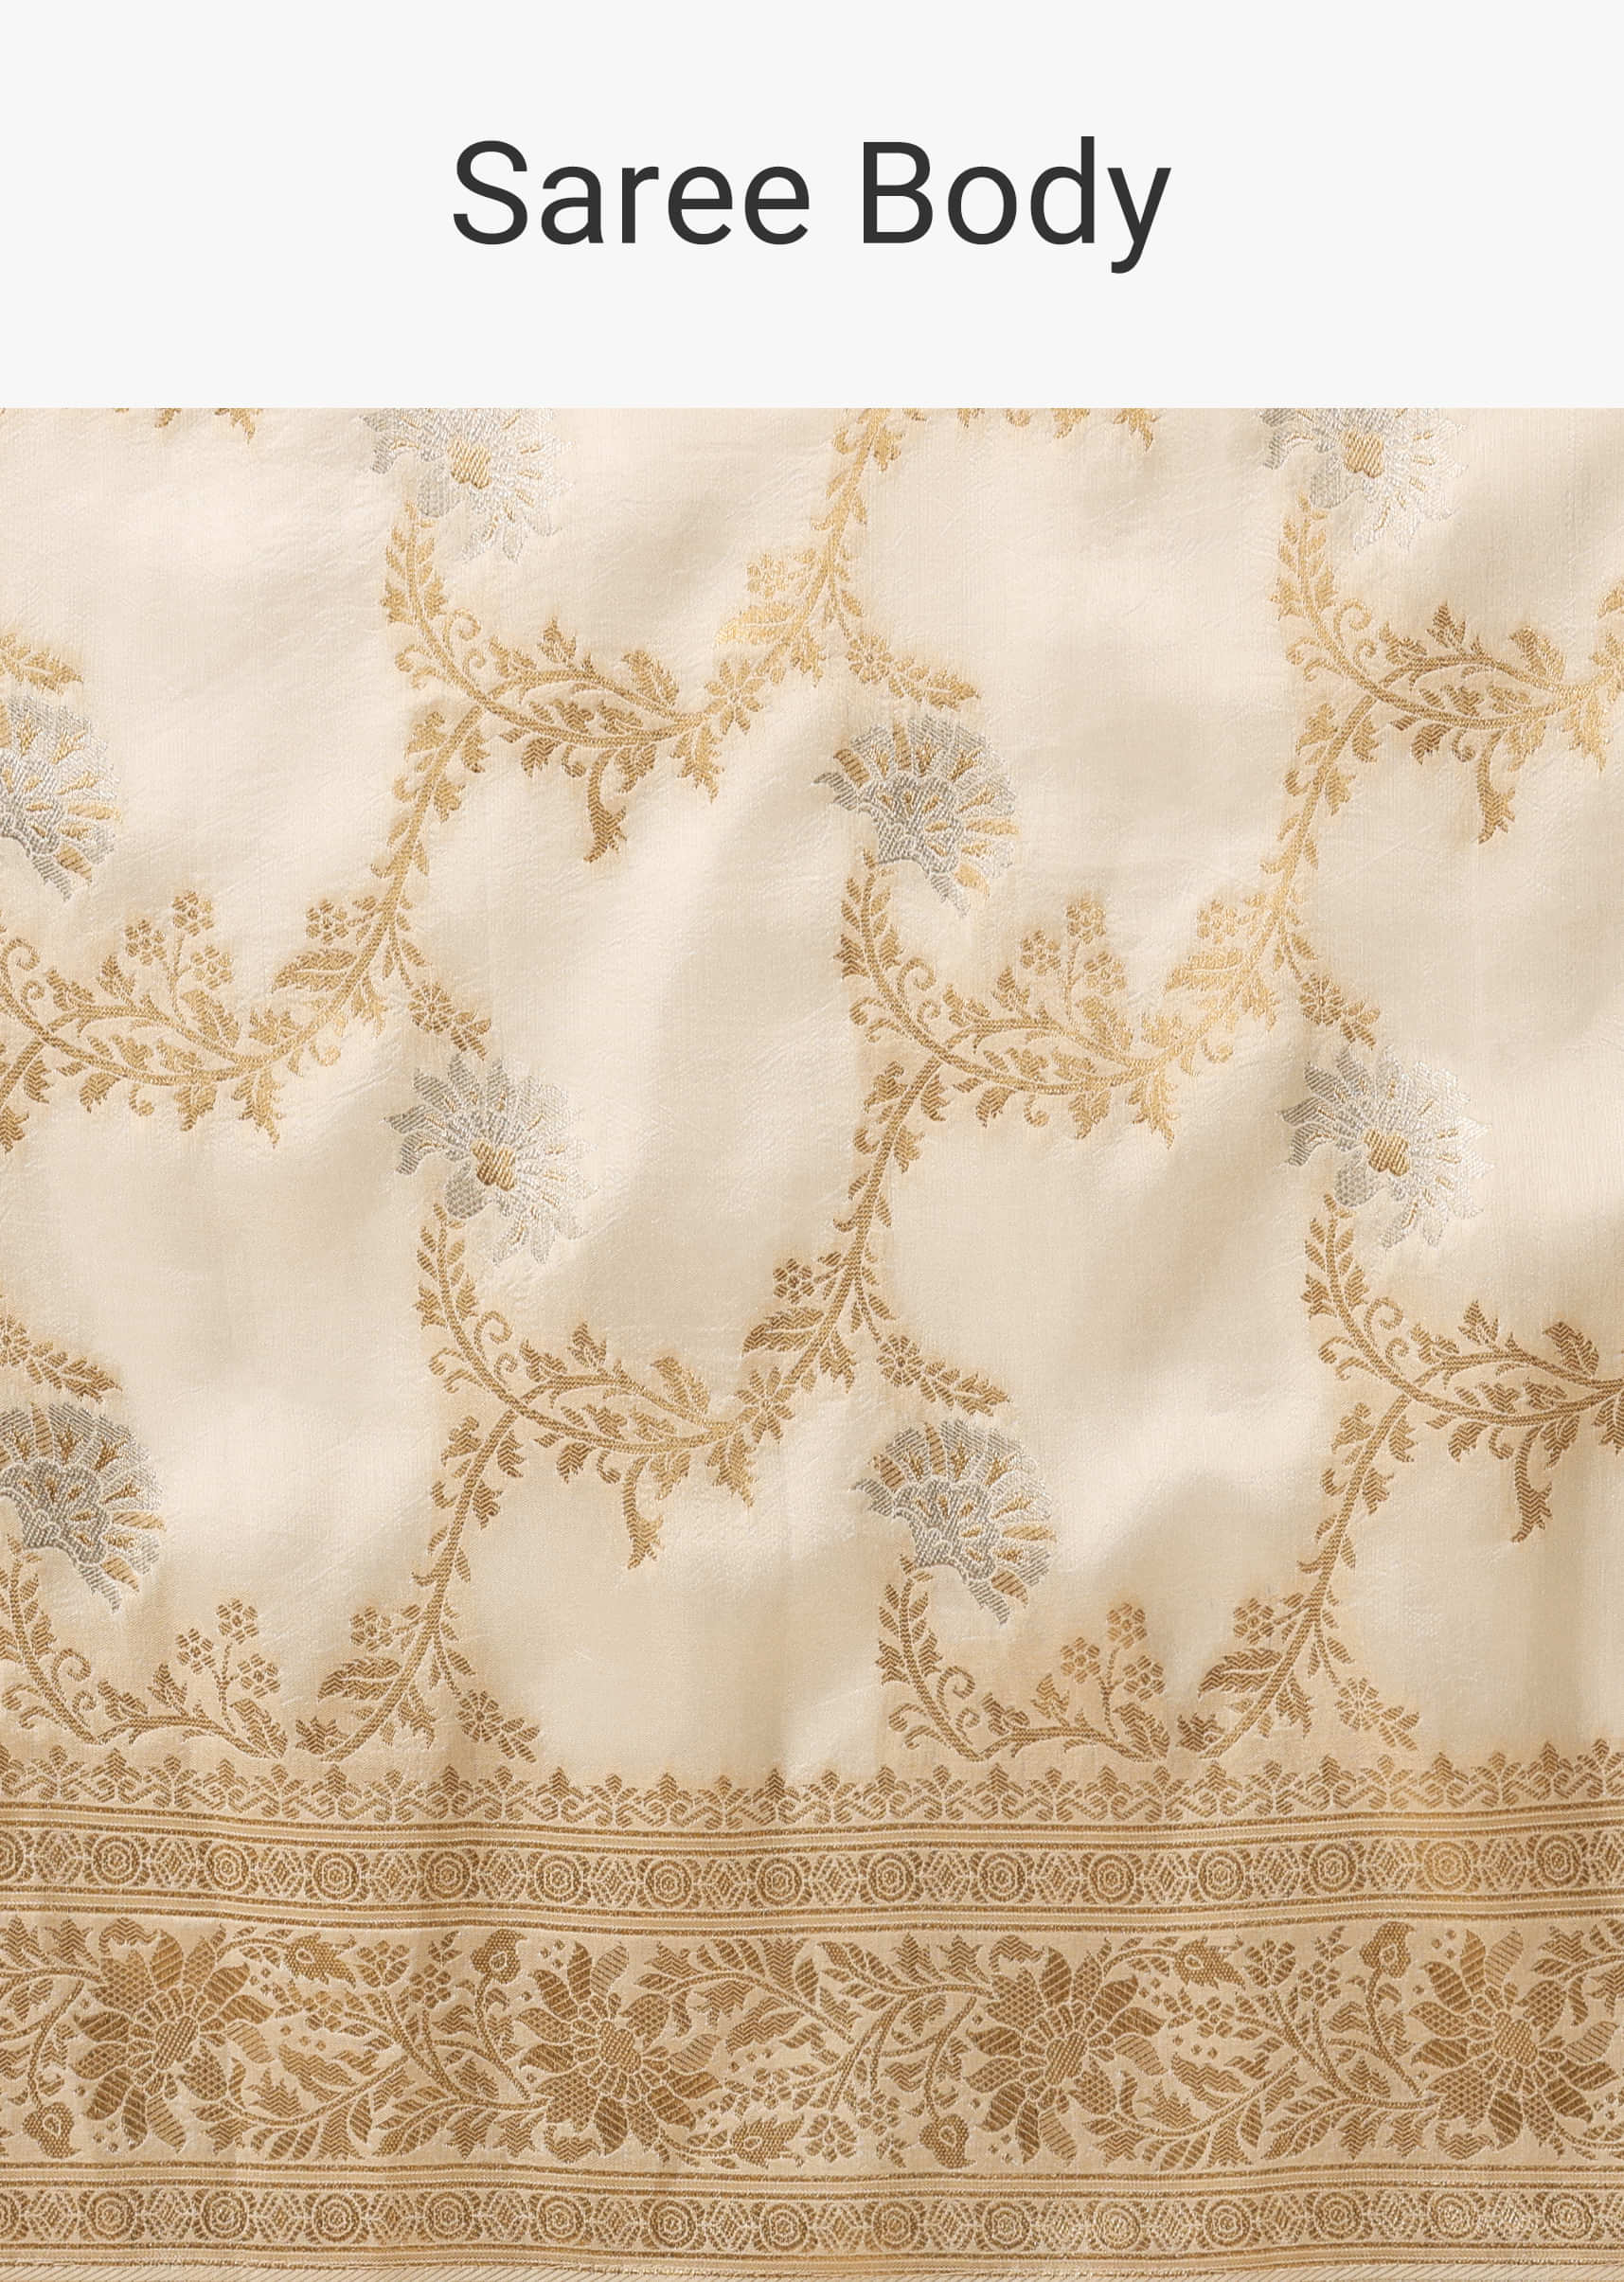 Ivory White Dola Silk Saree With Silver And Gold Jaal Embroidery In Floral Pattern